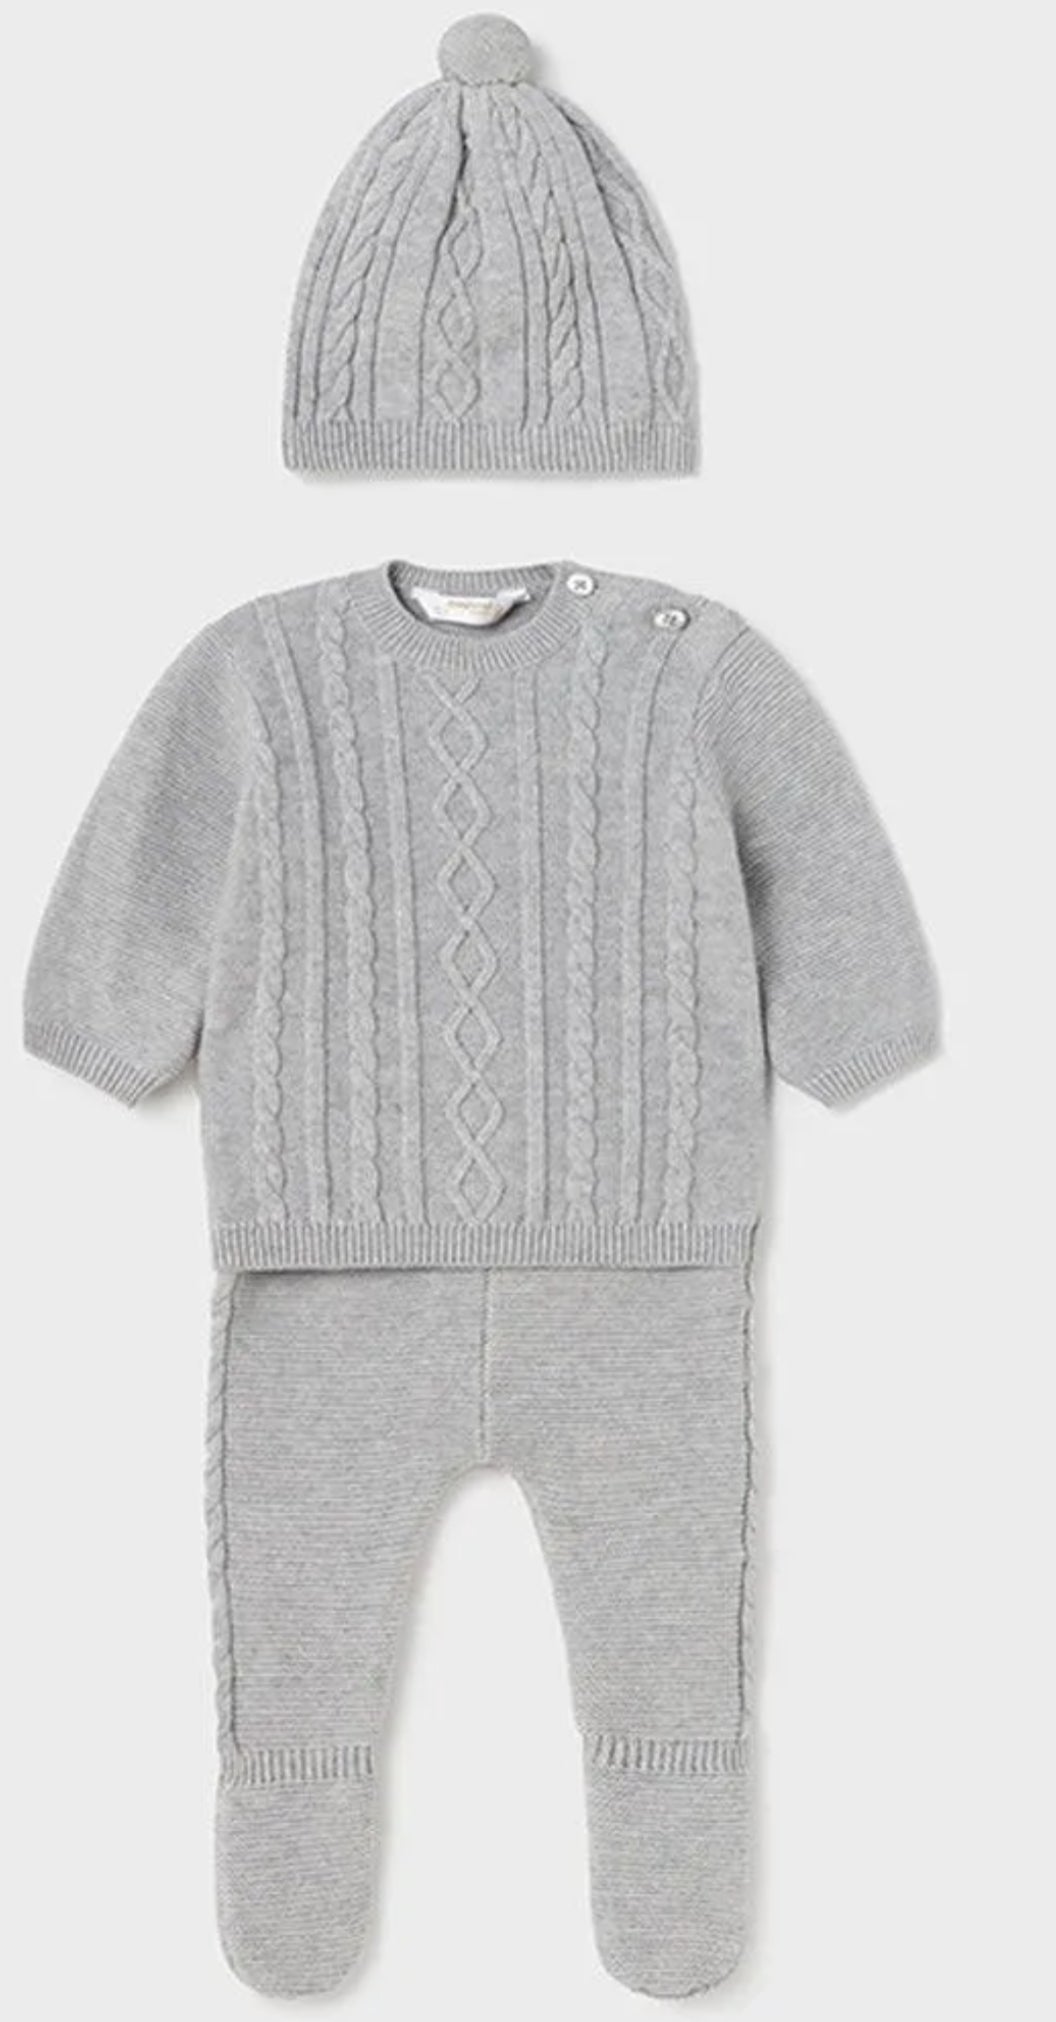 Knitted Baby's Light Gray 3-Piece Set Organic Cotton